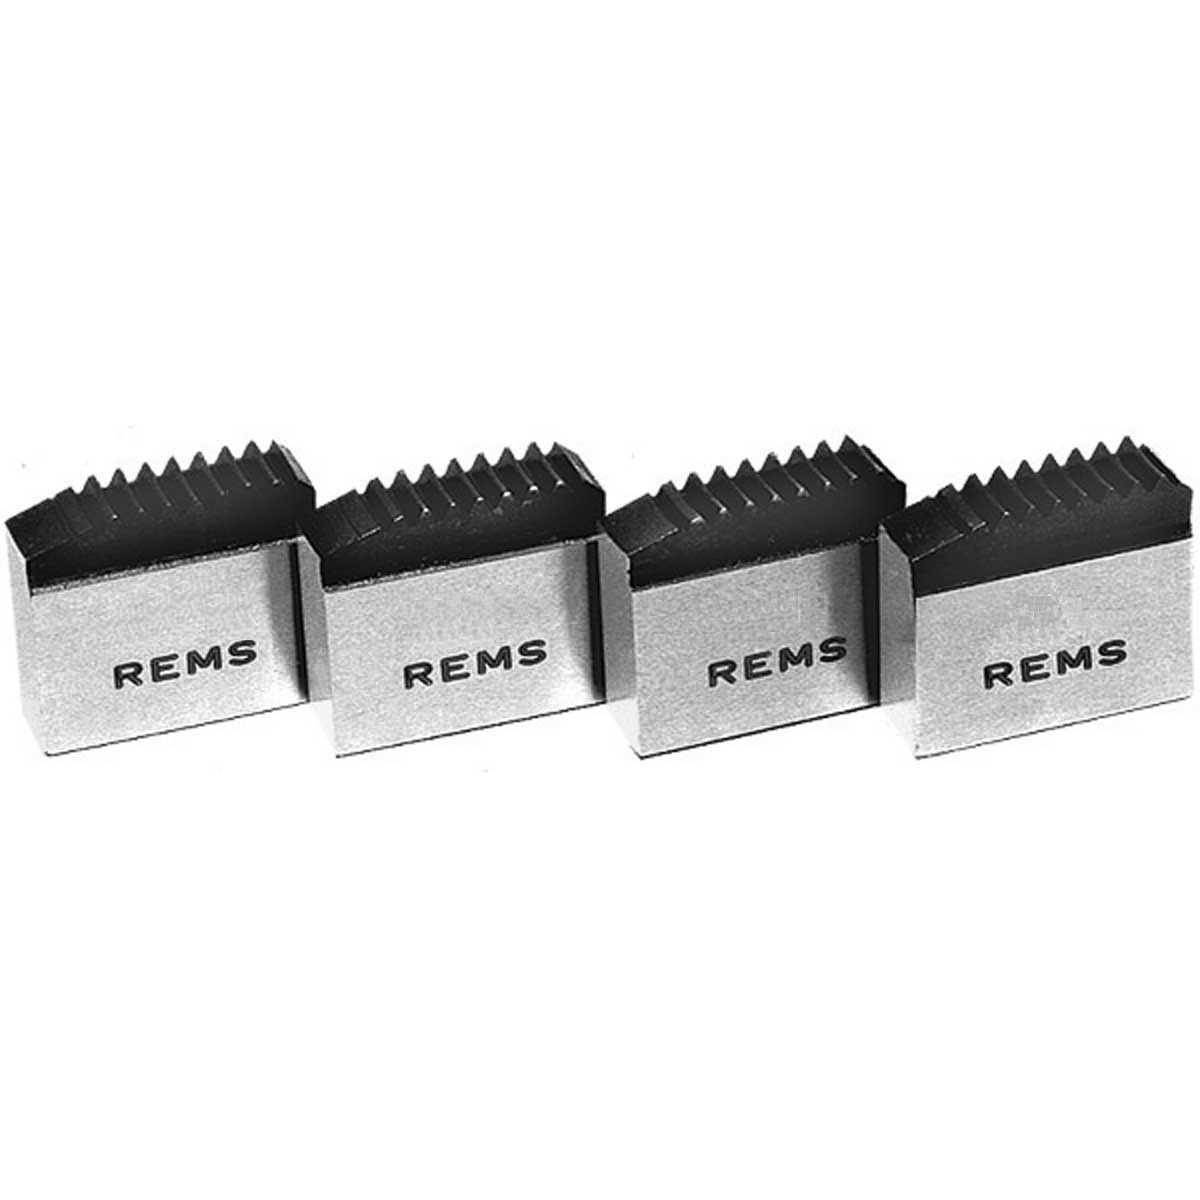 REMS - 1/2\" Replacement Die Set, 521232